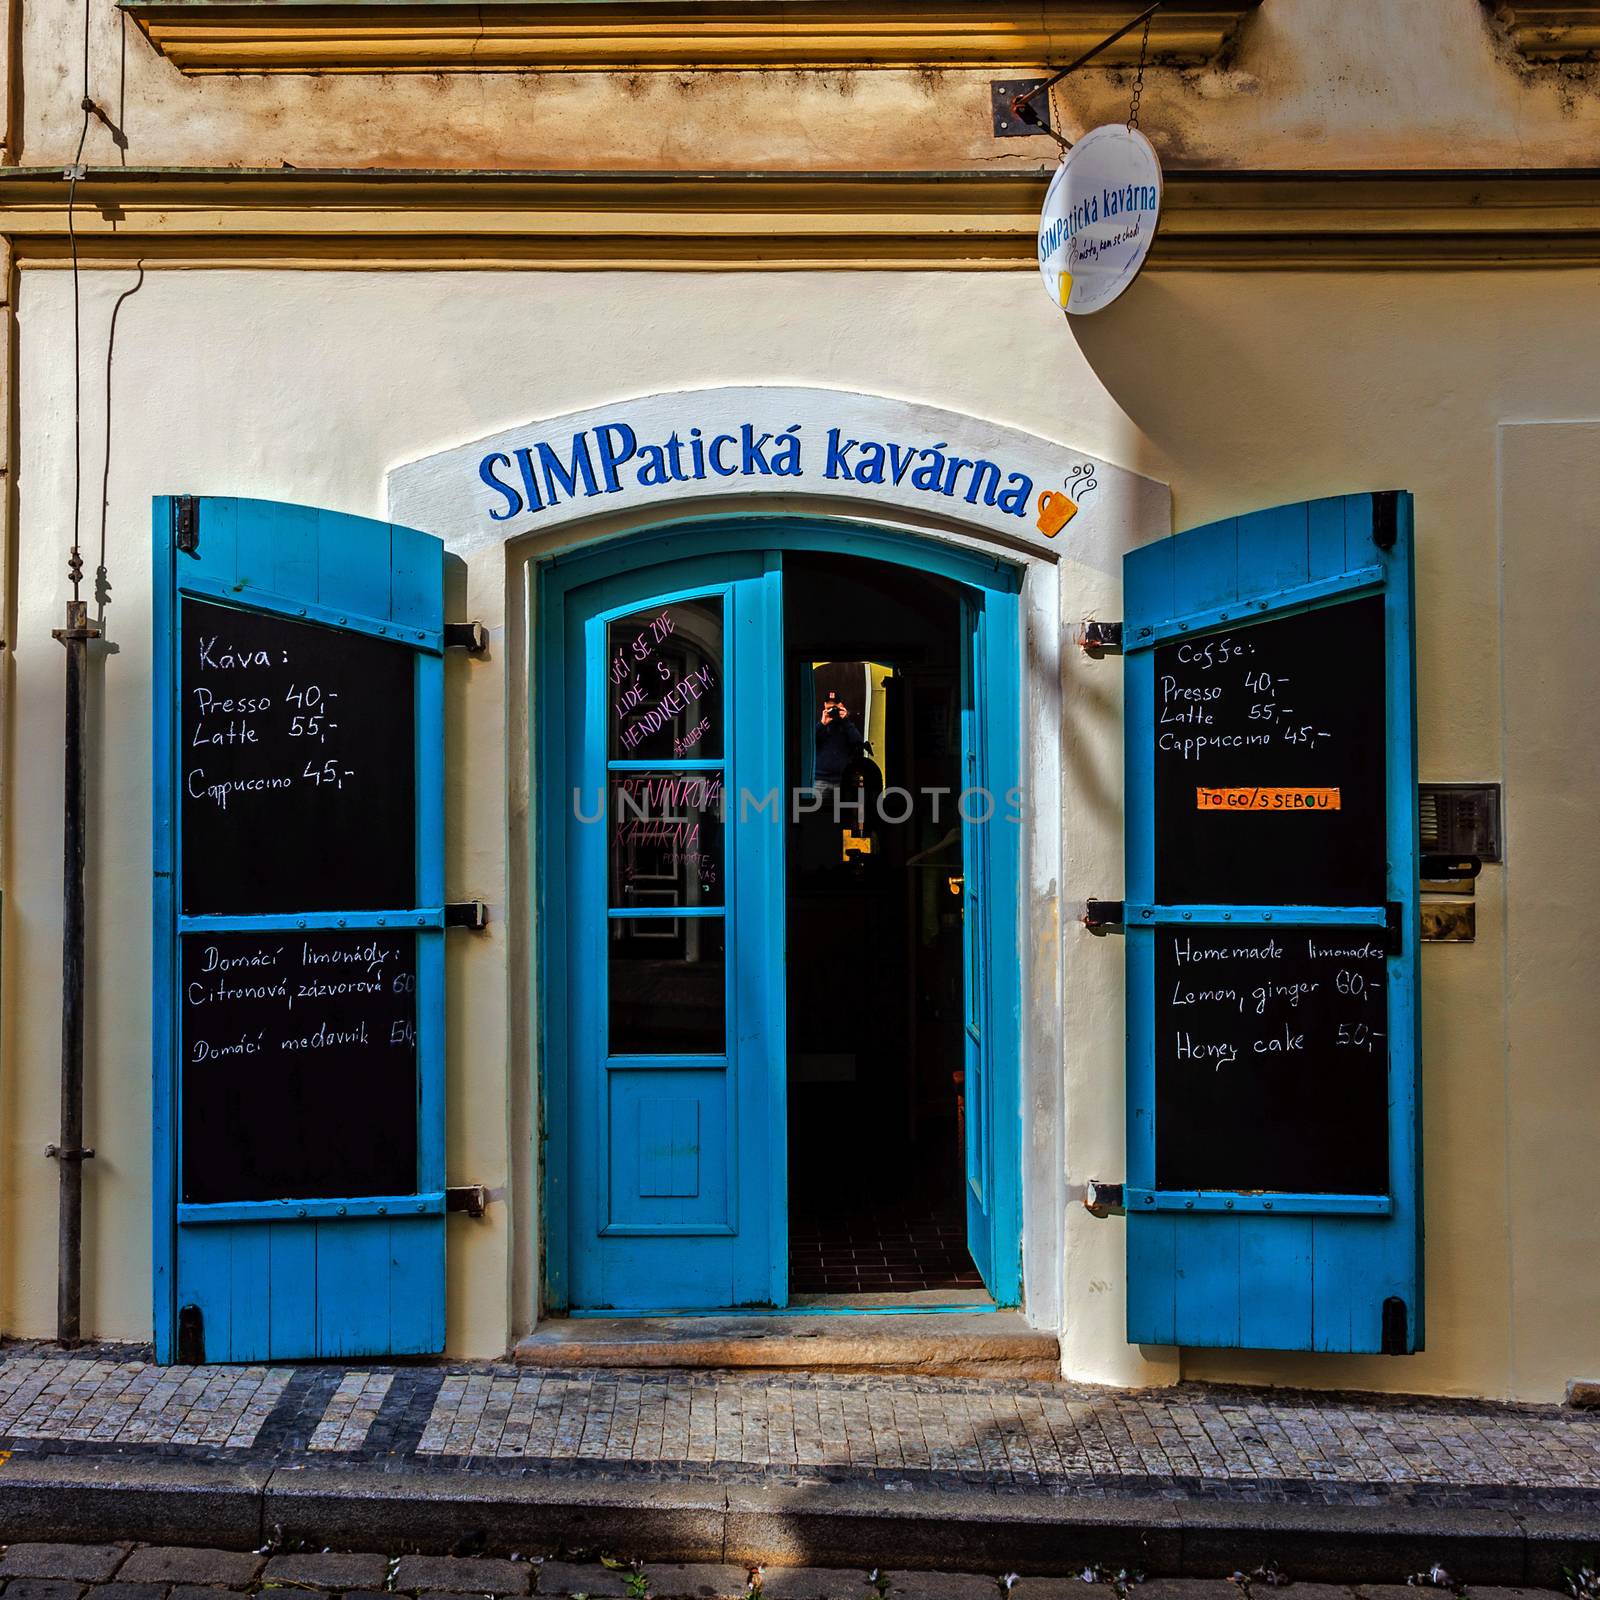 Small cafe in the Mala Strana, district of Prague, the capital of the Czech Republic, home to many relics and cultural attractions, one of top European destinations.